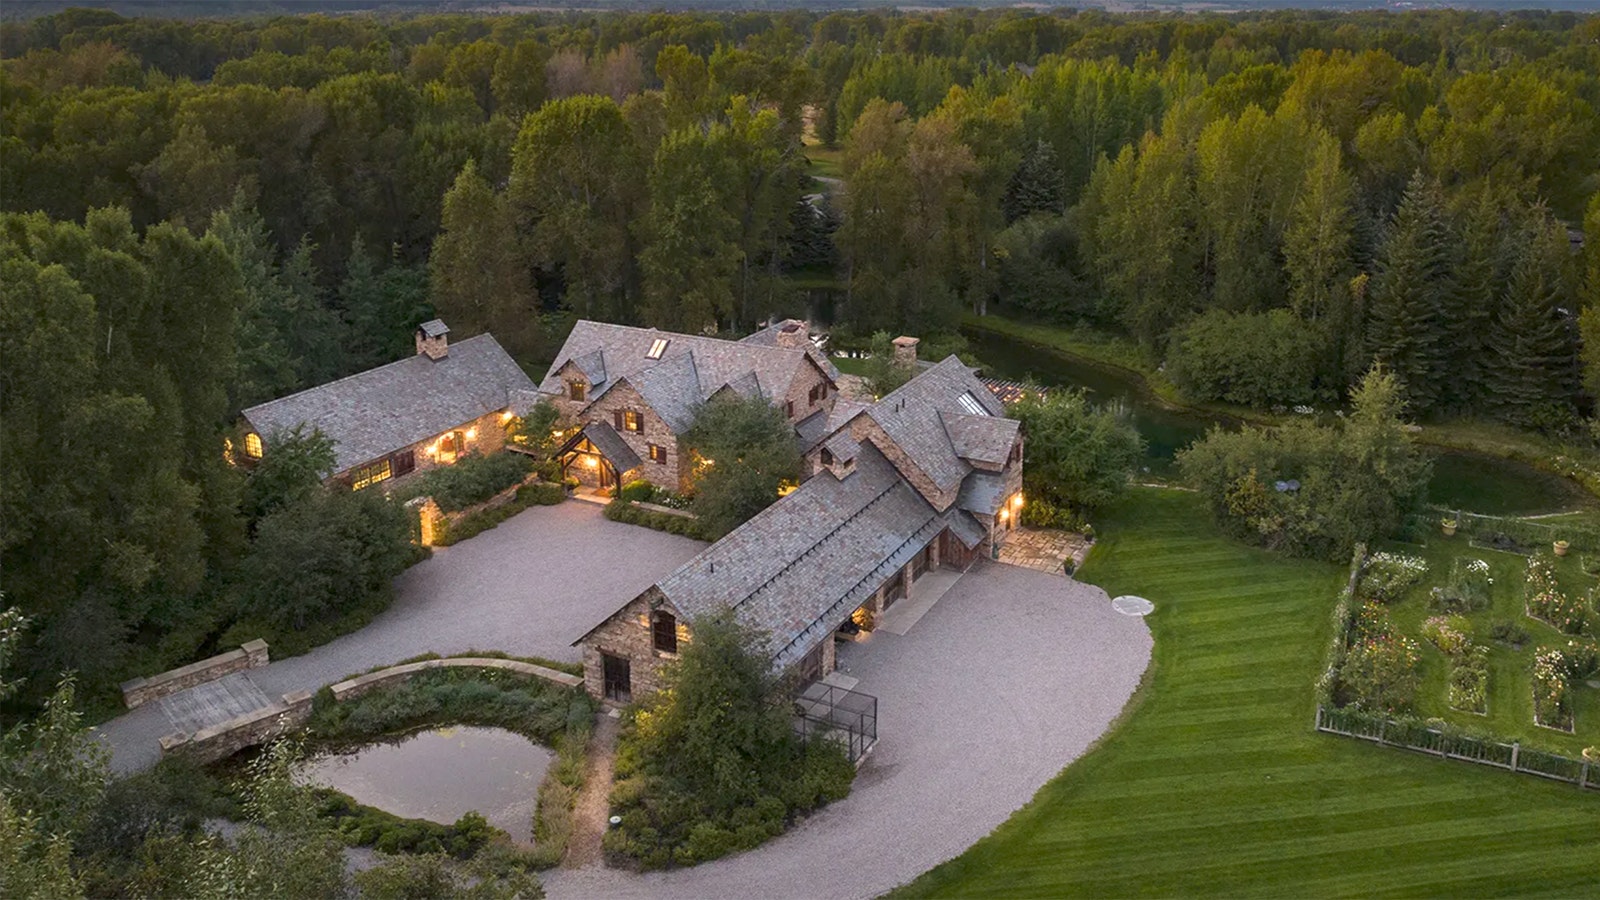 This nearly 5-acre property in the Jackson Hole area is listed with Sotheby's International Realty for $22.5 million.